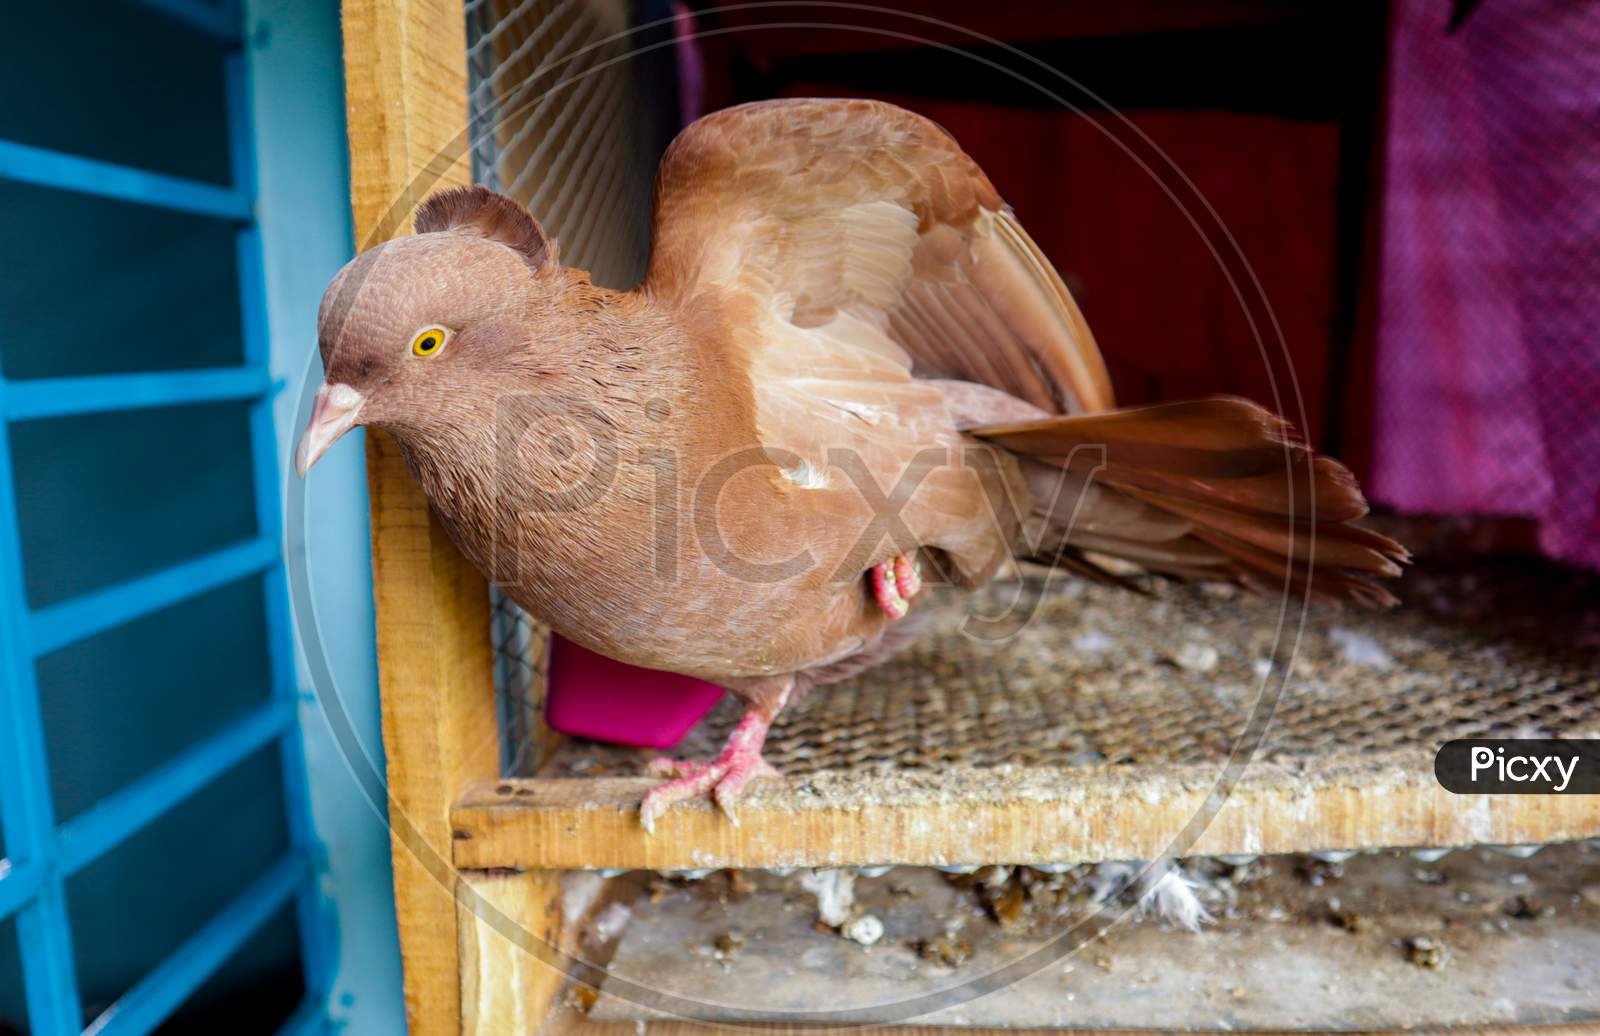 Indian brown color Domestic pigeon standing on one foot in the open cage beside window